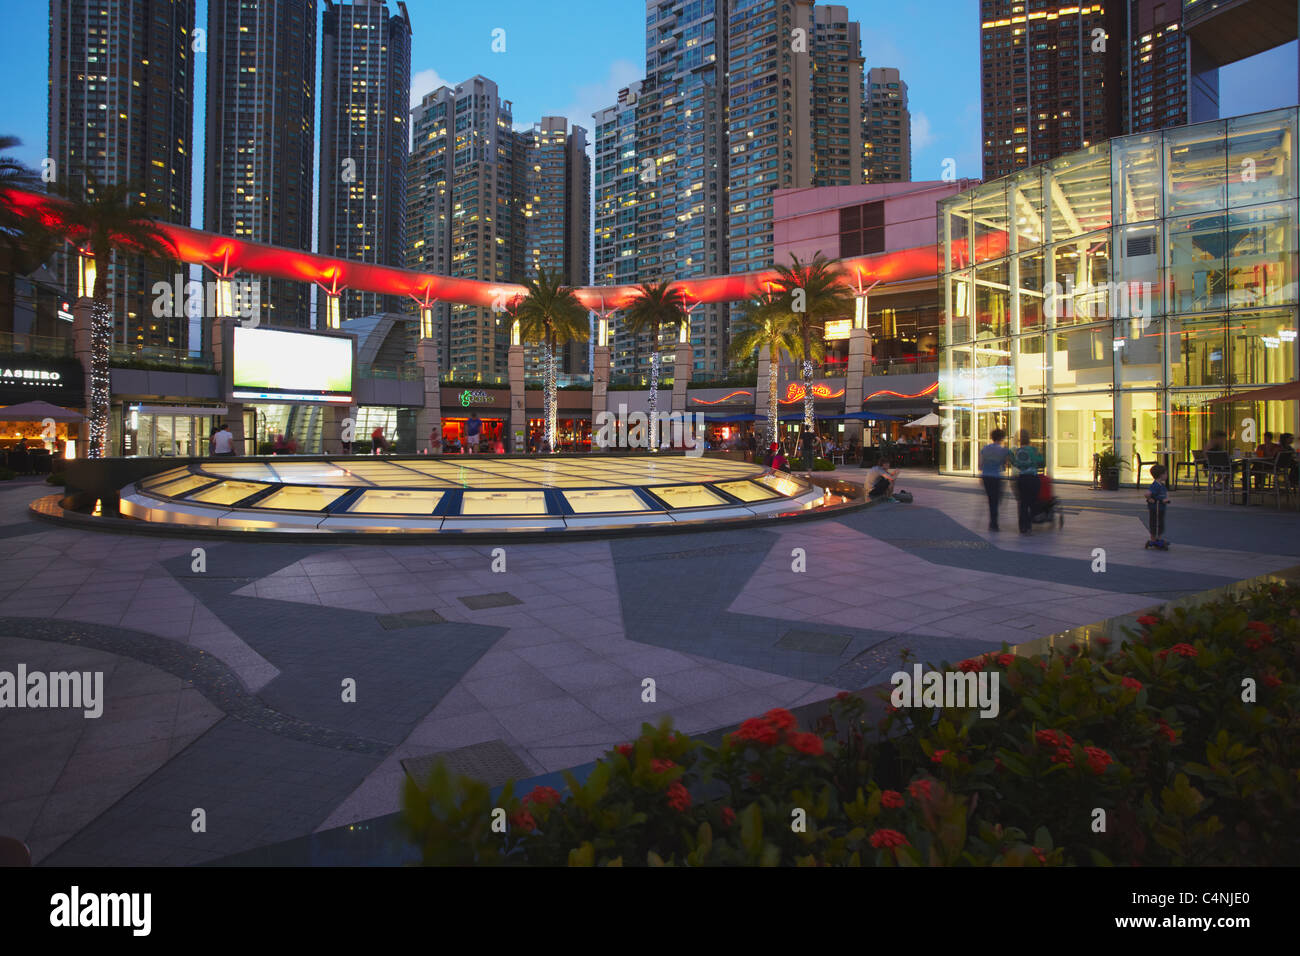 Restaurants in Civic Square, Elemente Mall, West Kowloon, Hong Kong, China Stockfoto